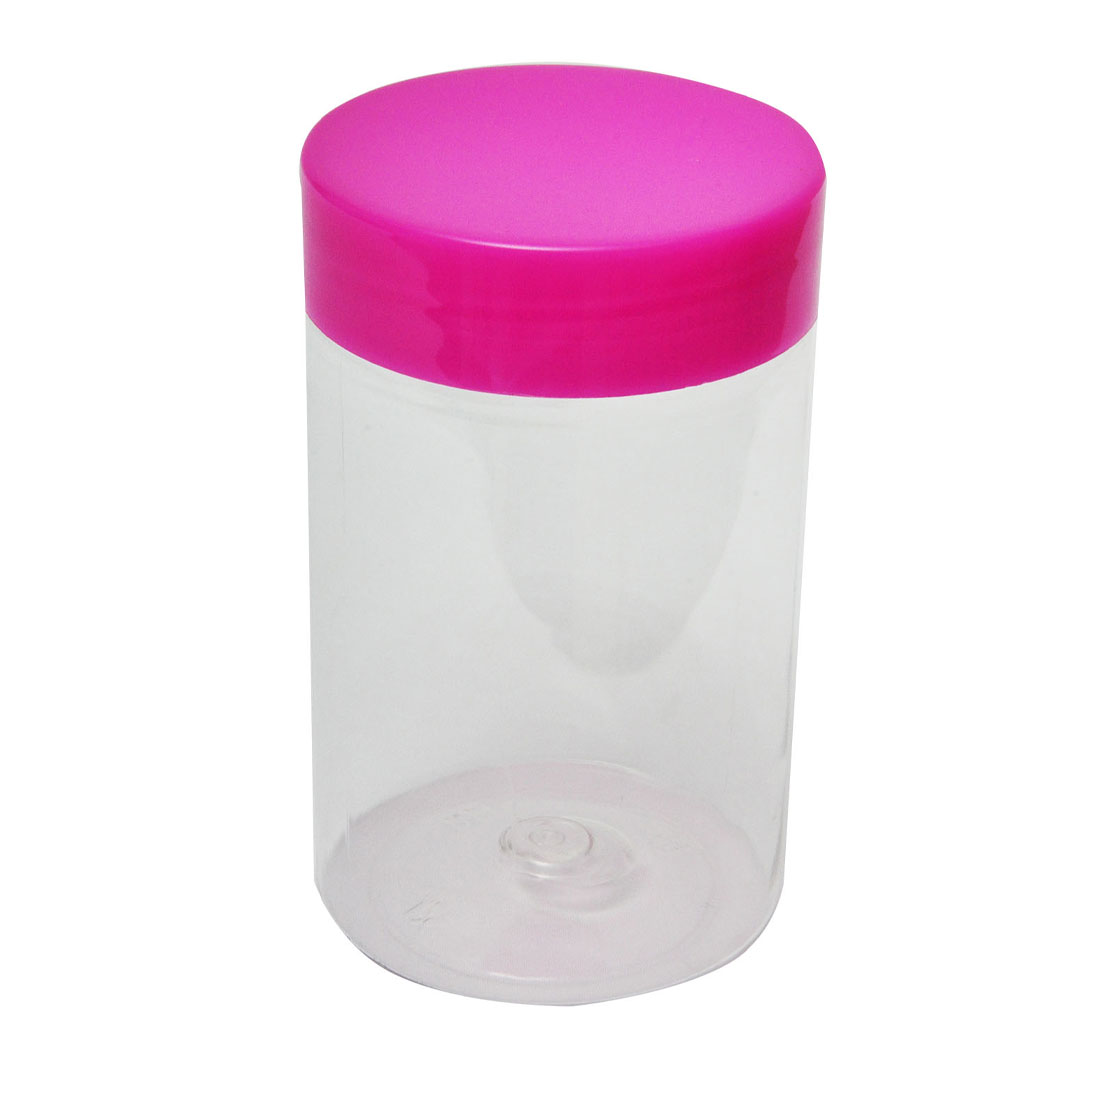 Clear Plastic Confectionery Bottle - WM30375CL